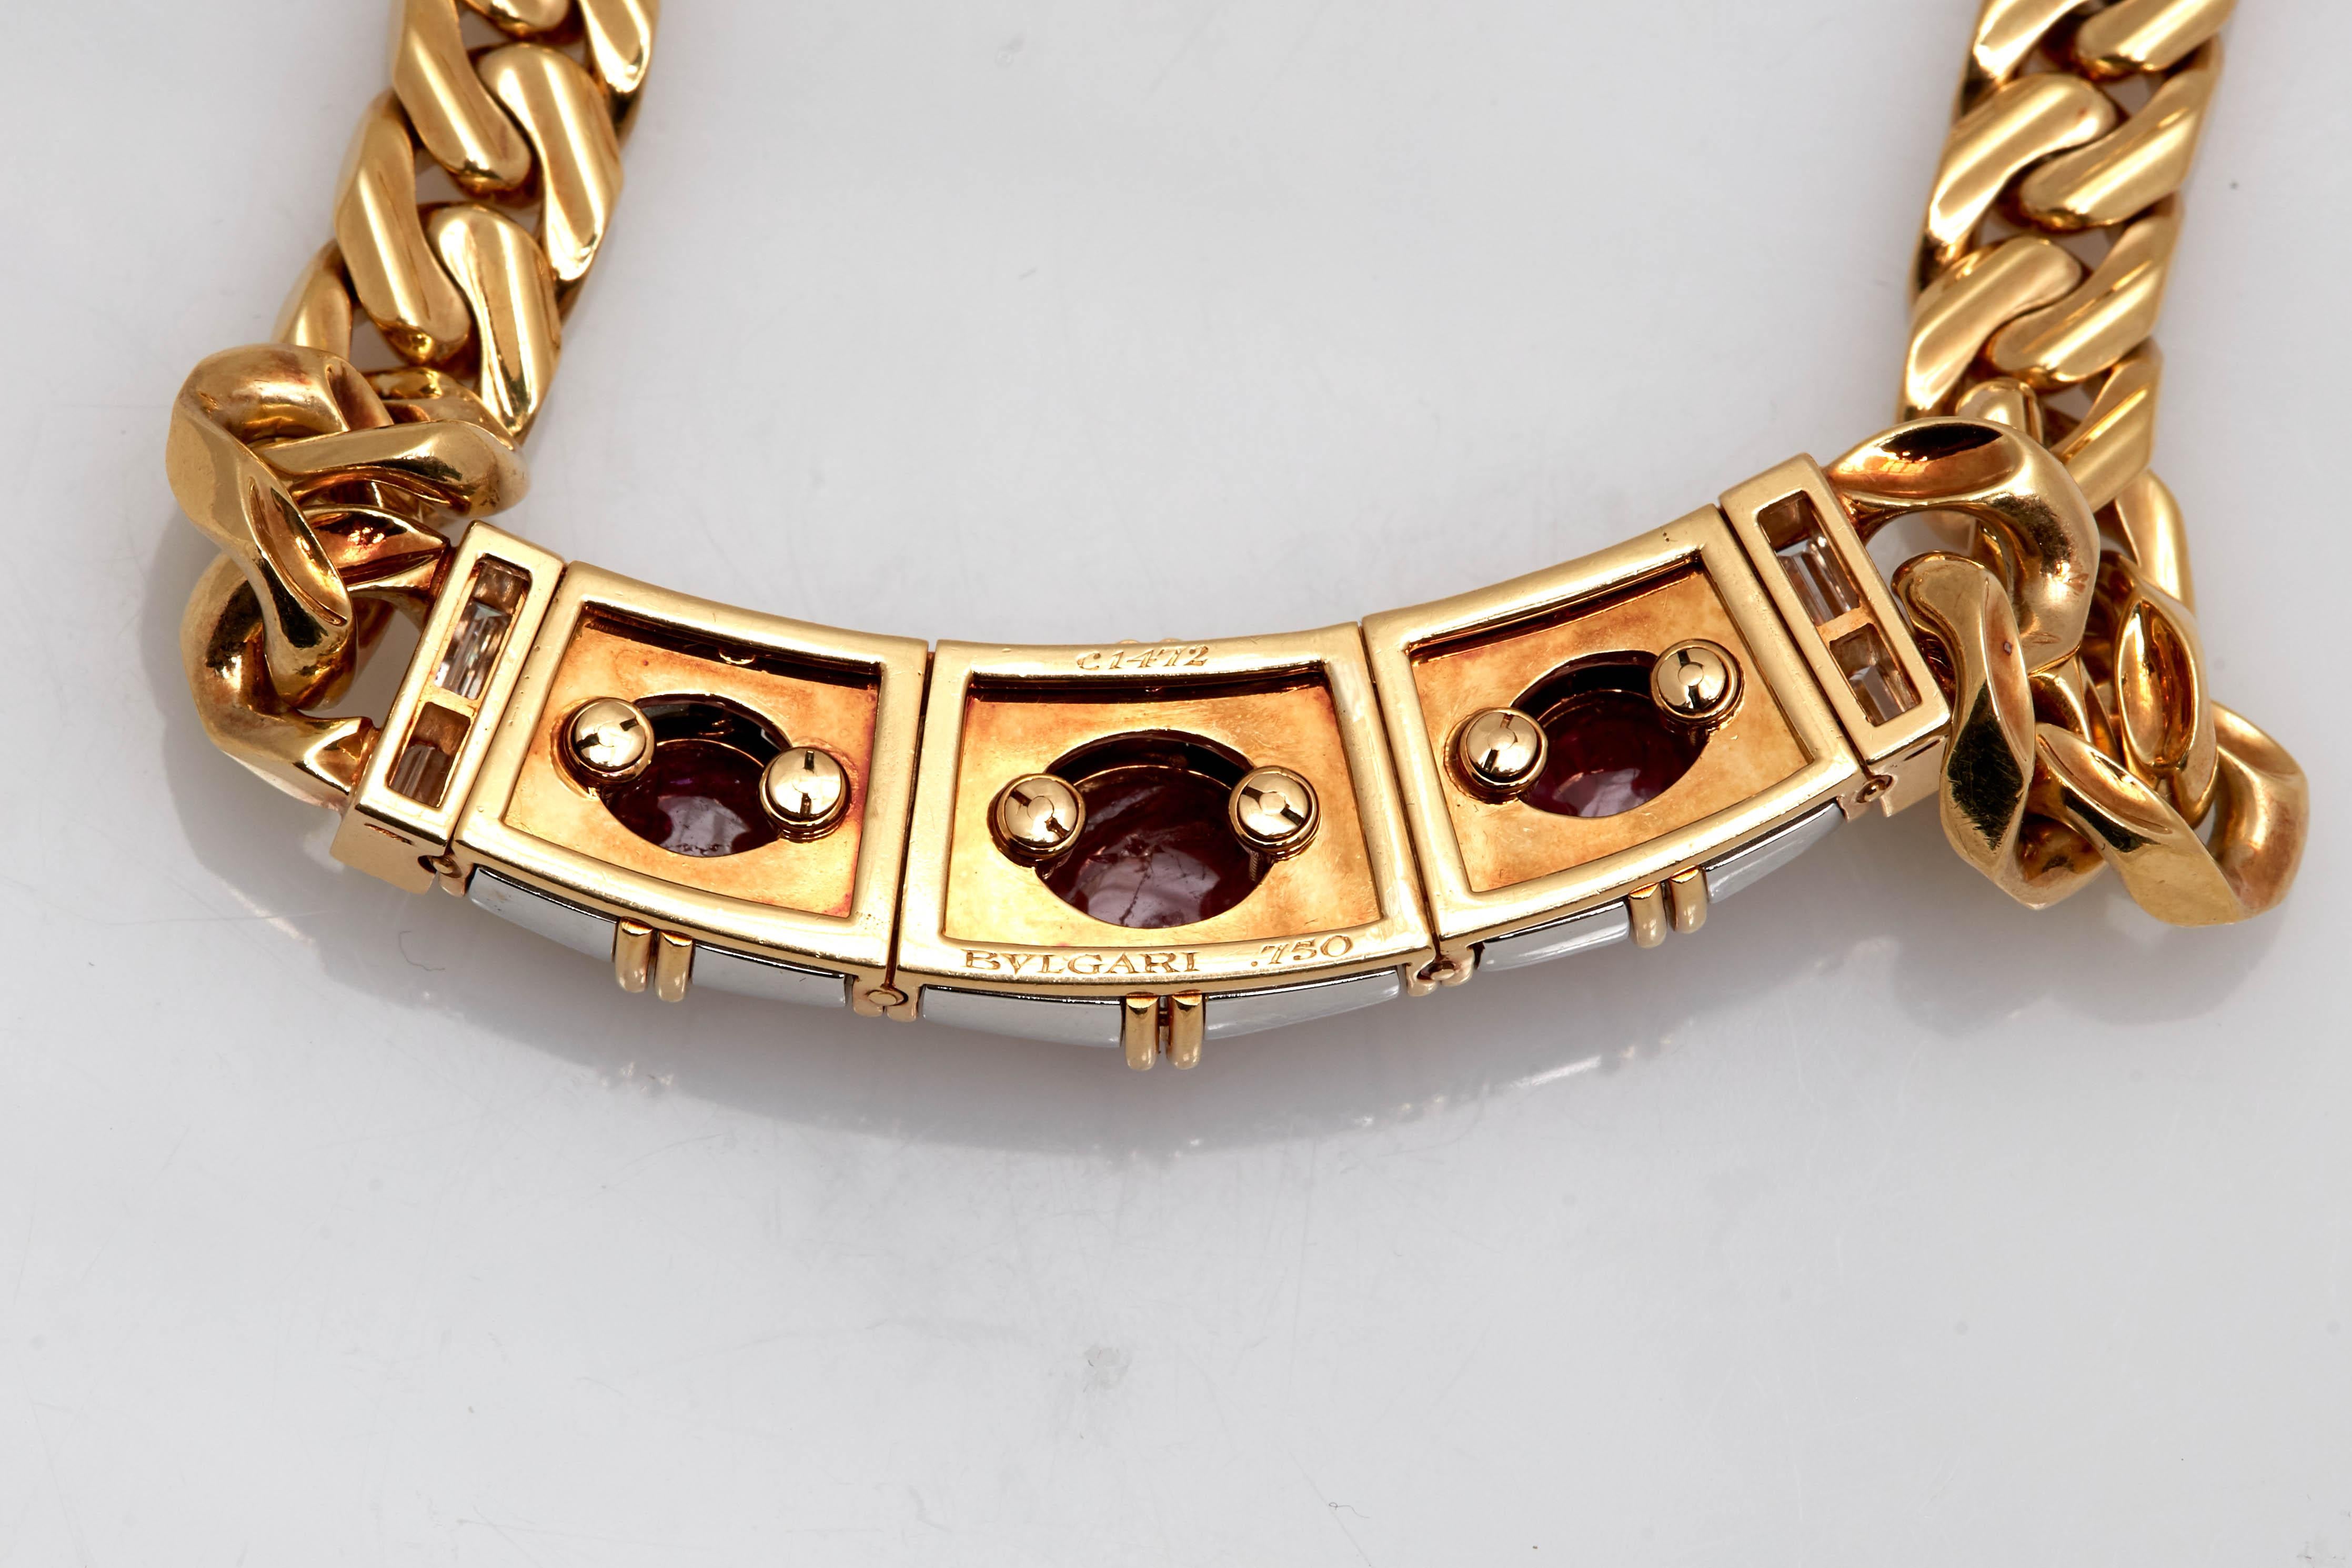 A rare Bulgari chain necklace in 18kt yellow and white gold, accented with diamonds, showcasing three natural no-heat Burma rubies (app. 9crts total). Made in Italy, circa 1970